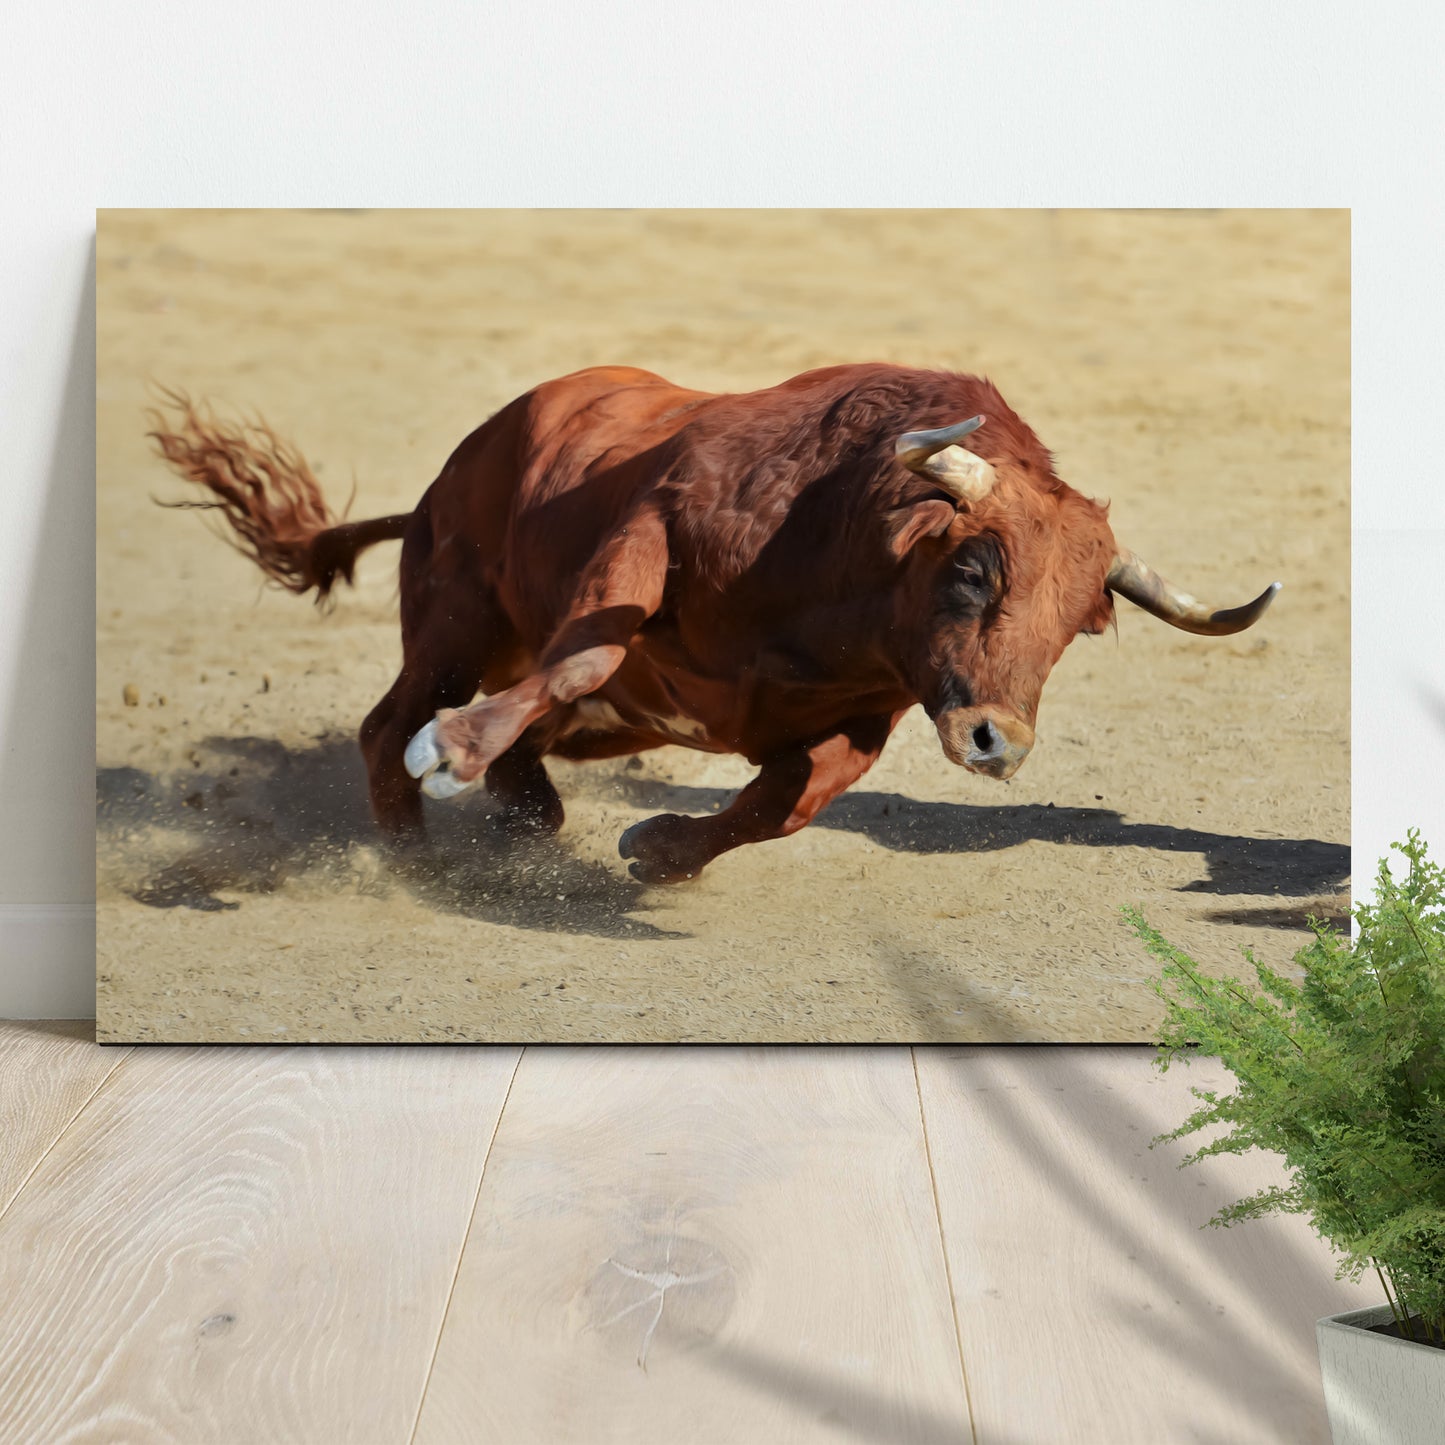 Running Wild Bull Canvas Wall Art Style 1 - Image by Tailored Canvases